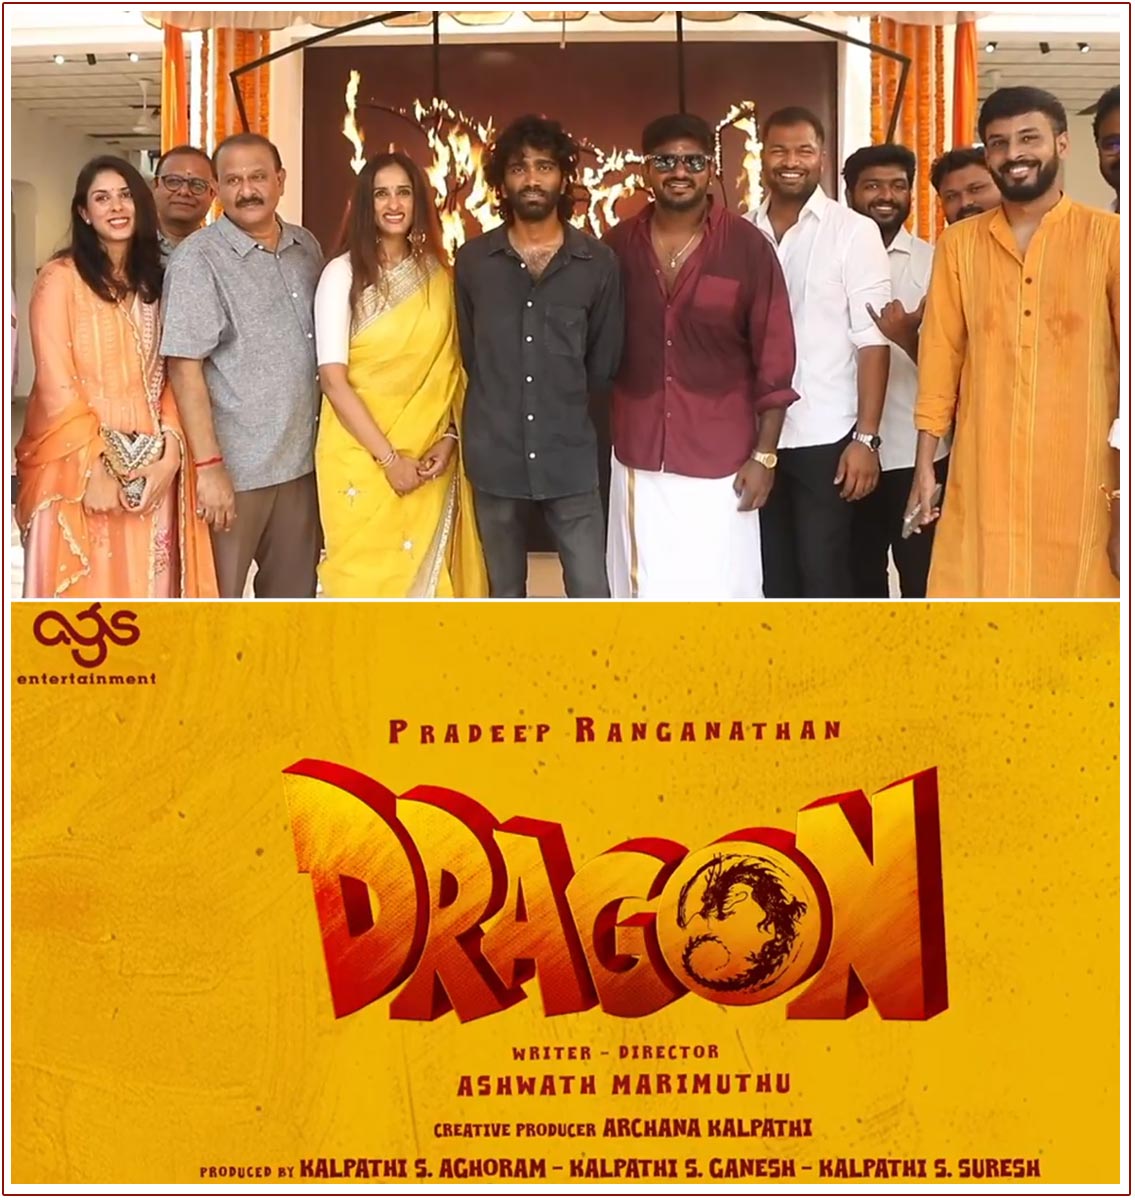 Pradeep Ranganathan is back with another exciting project titled Dragon